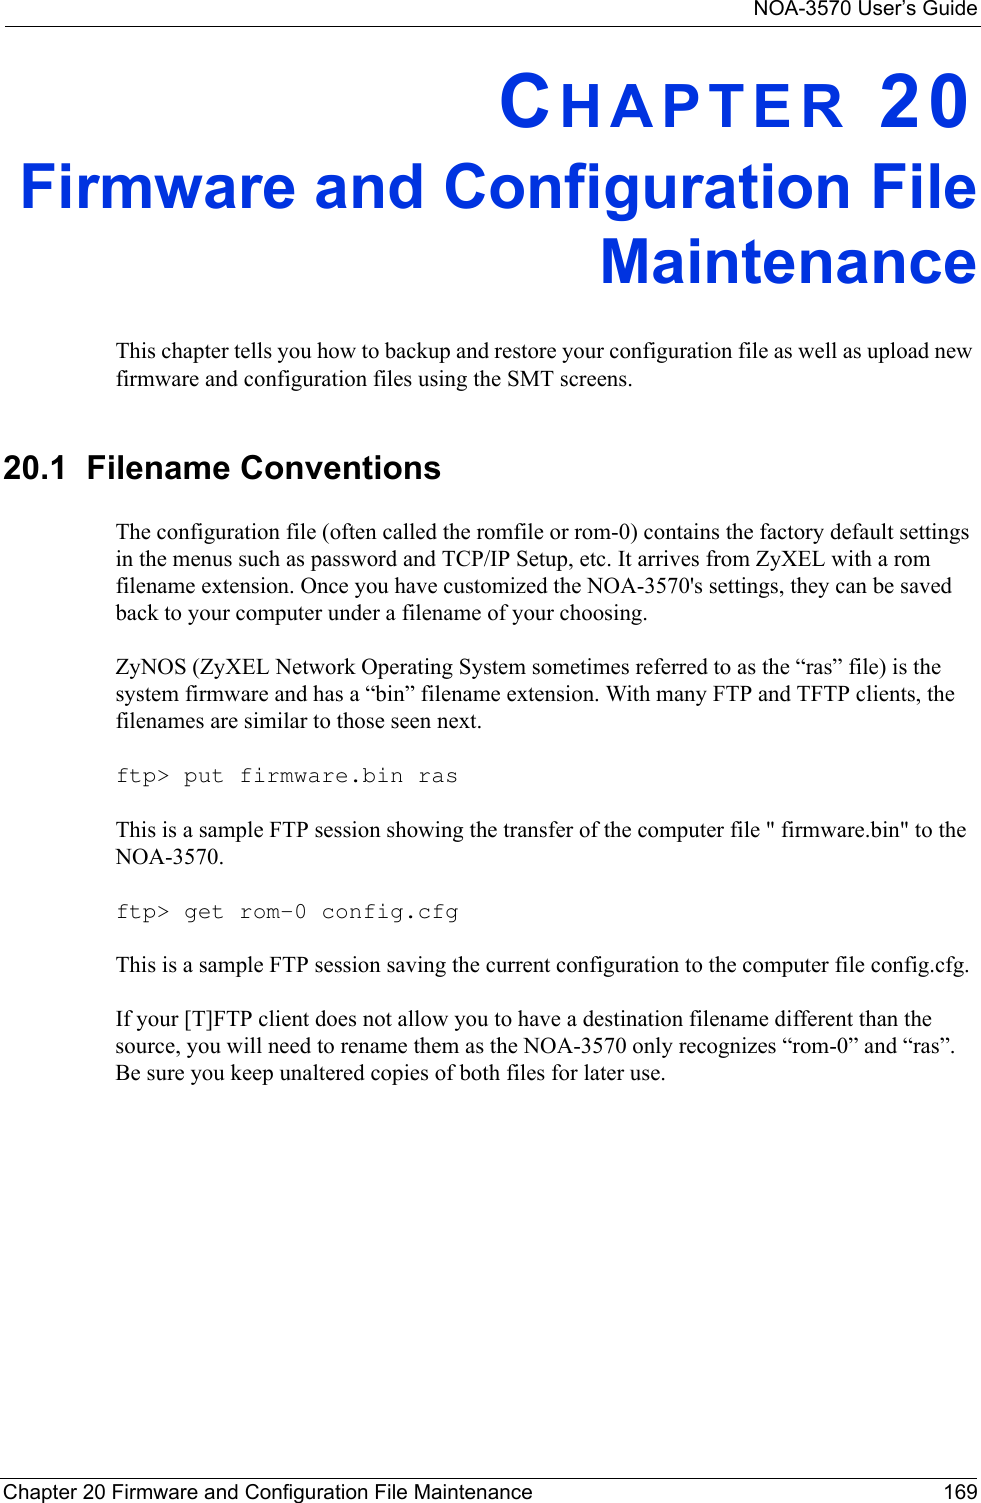 NOA-3570 User’s GuideChapter 20 Firmware and Configuration File Maintenance 169CHAPTER 20Firmware and Configuration FileMaintenanceThis chapter tells you how to backup and restore your configuration file as well as upload new firmware and configuration files using the SMT screens.20.1  Filename ConventionsThe configuration file (often called the romfile or rom-0) contains the factory default settings in the menus such as password and TCP/IP Setup, etc. It arrives from ZyXEL with a rom filename extension. Once you have customized the NOA-3570&apos;s settings, they can be saved back to your computer under a filename of your choosing. ZyNOS (ZyXEL Network Operating System sometimes referred to as the “ras” file) is the system firmware and has a “bin” filename extension. With many FTP and TFTP clients, the filenames are similar to those seen next. ftp&gt; put firmware.bin rasThis is a sample FTP session showing the transfer of the computer file &quot; firmware.bin&quot; to the NOA-3570.ftp&gt; get rom-0 config.cfgThis is a sample FTP session saving the current configuration to the computer file config.cfg.If your [T]FTP client does not allow you to have a destination filename different than the source, you will need to rename them as the NOA-3570 only recognizes “rom-0” and “ras”. Be sure you keep unaltered copies of both files for later use.